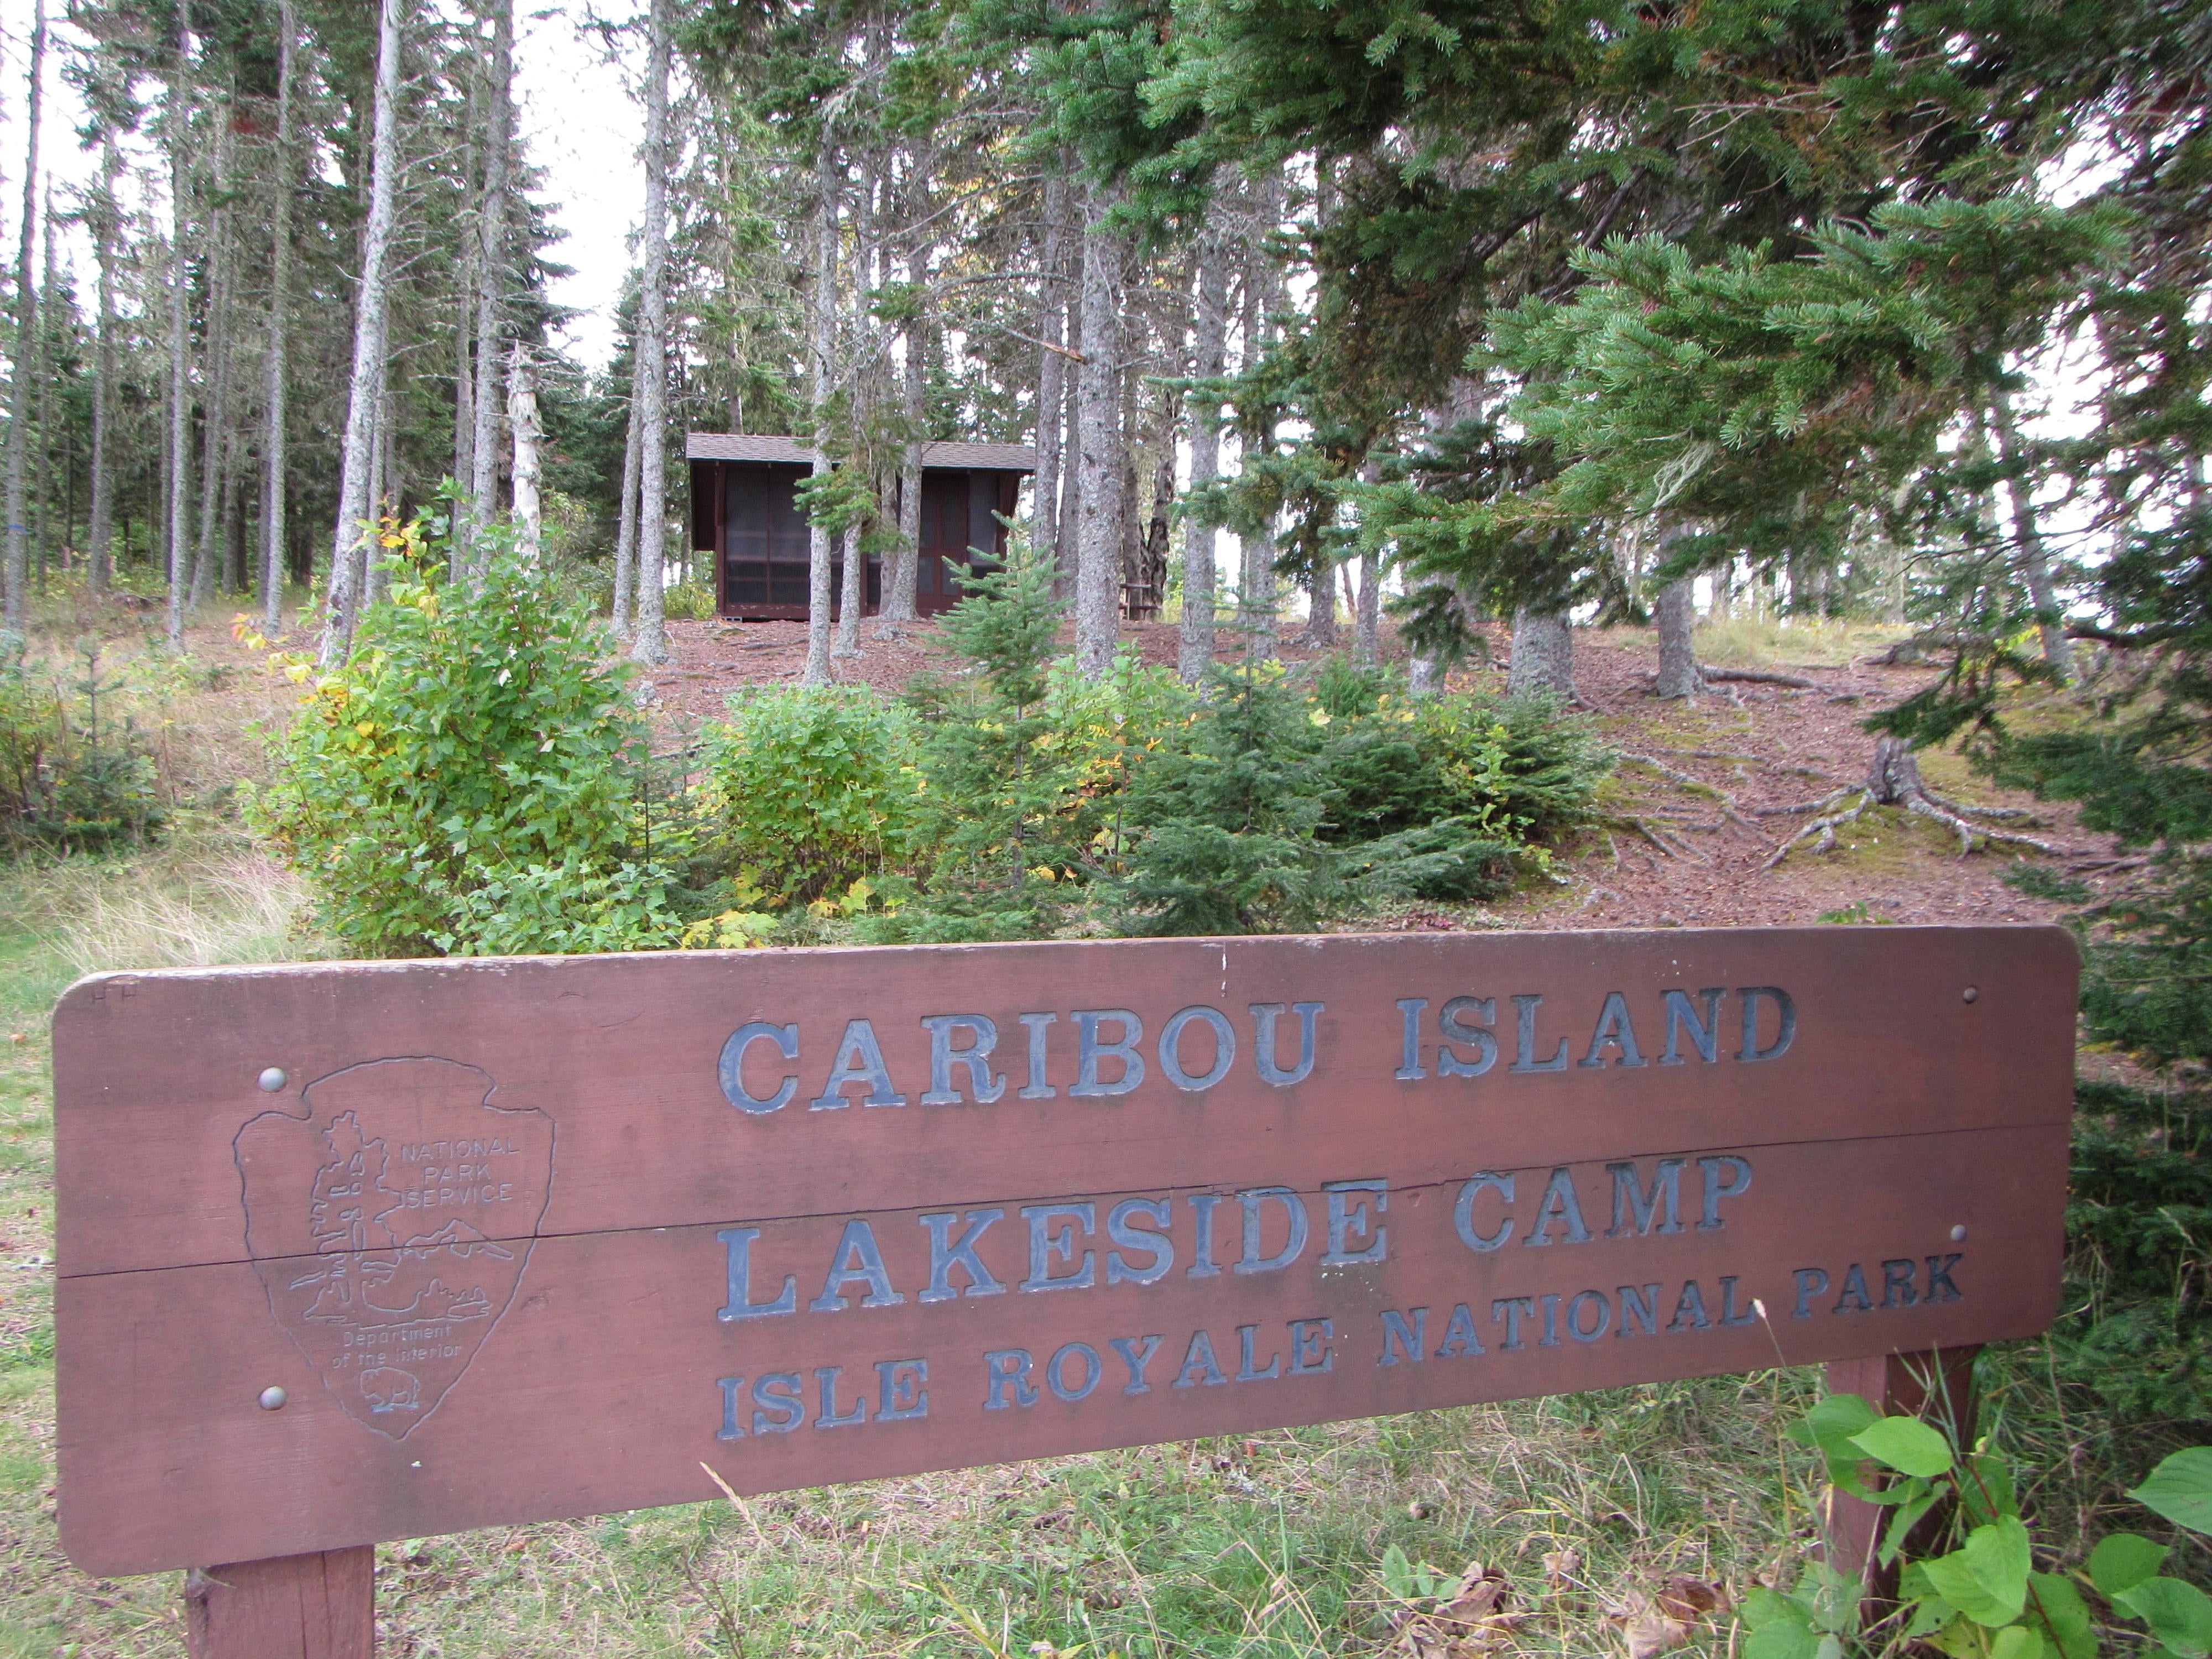 Camper submitted image from Caribou Island Campground — Isle Royale National Park - 2